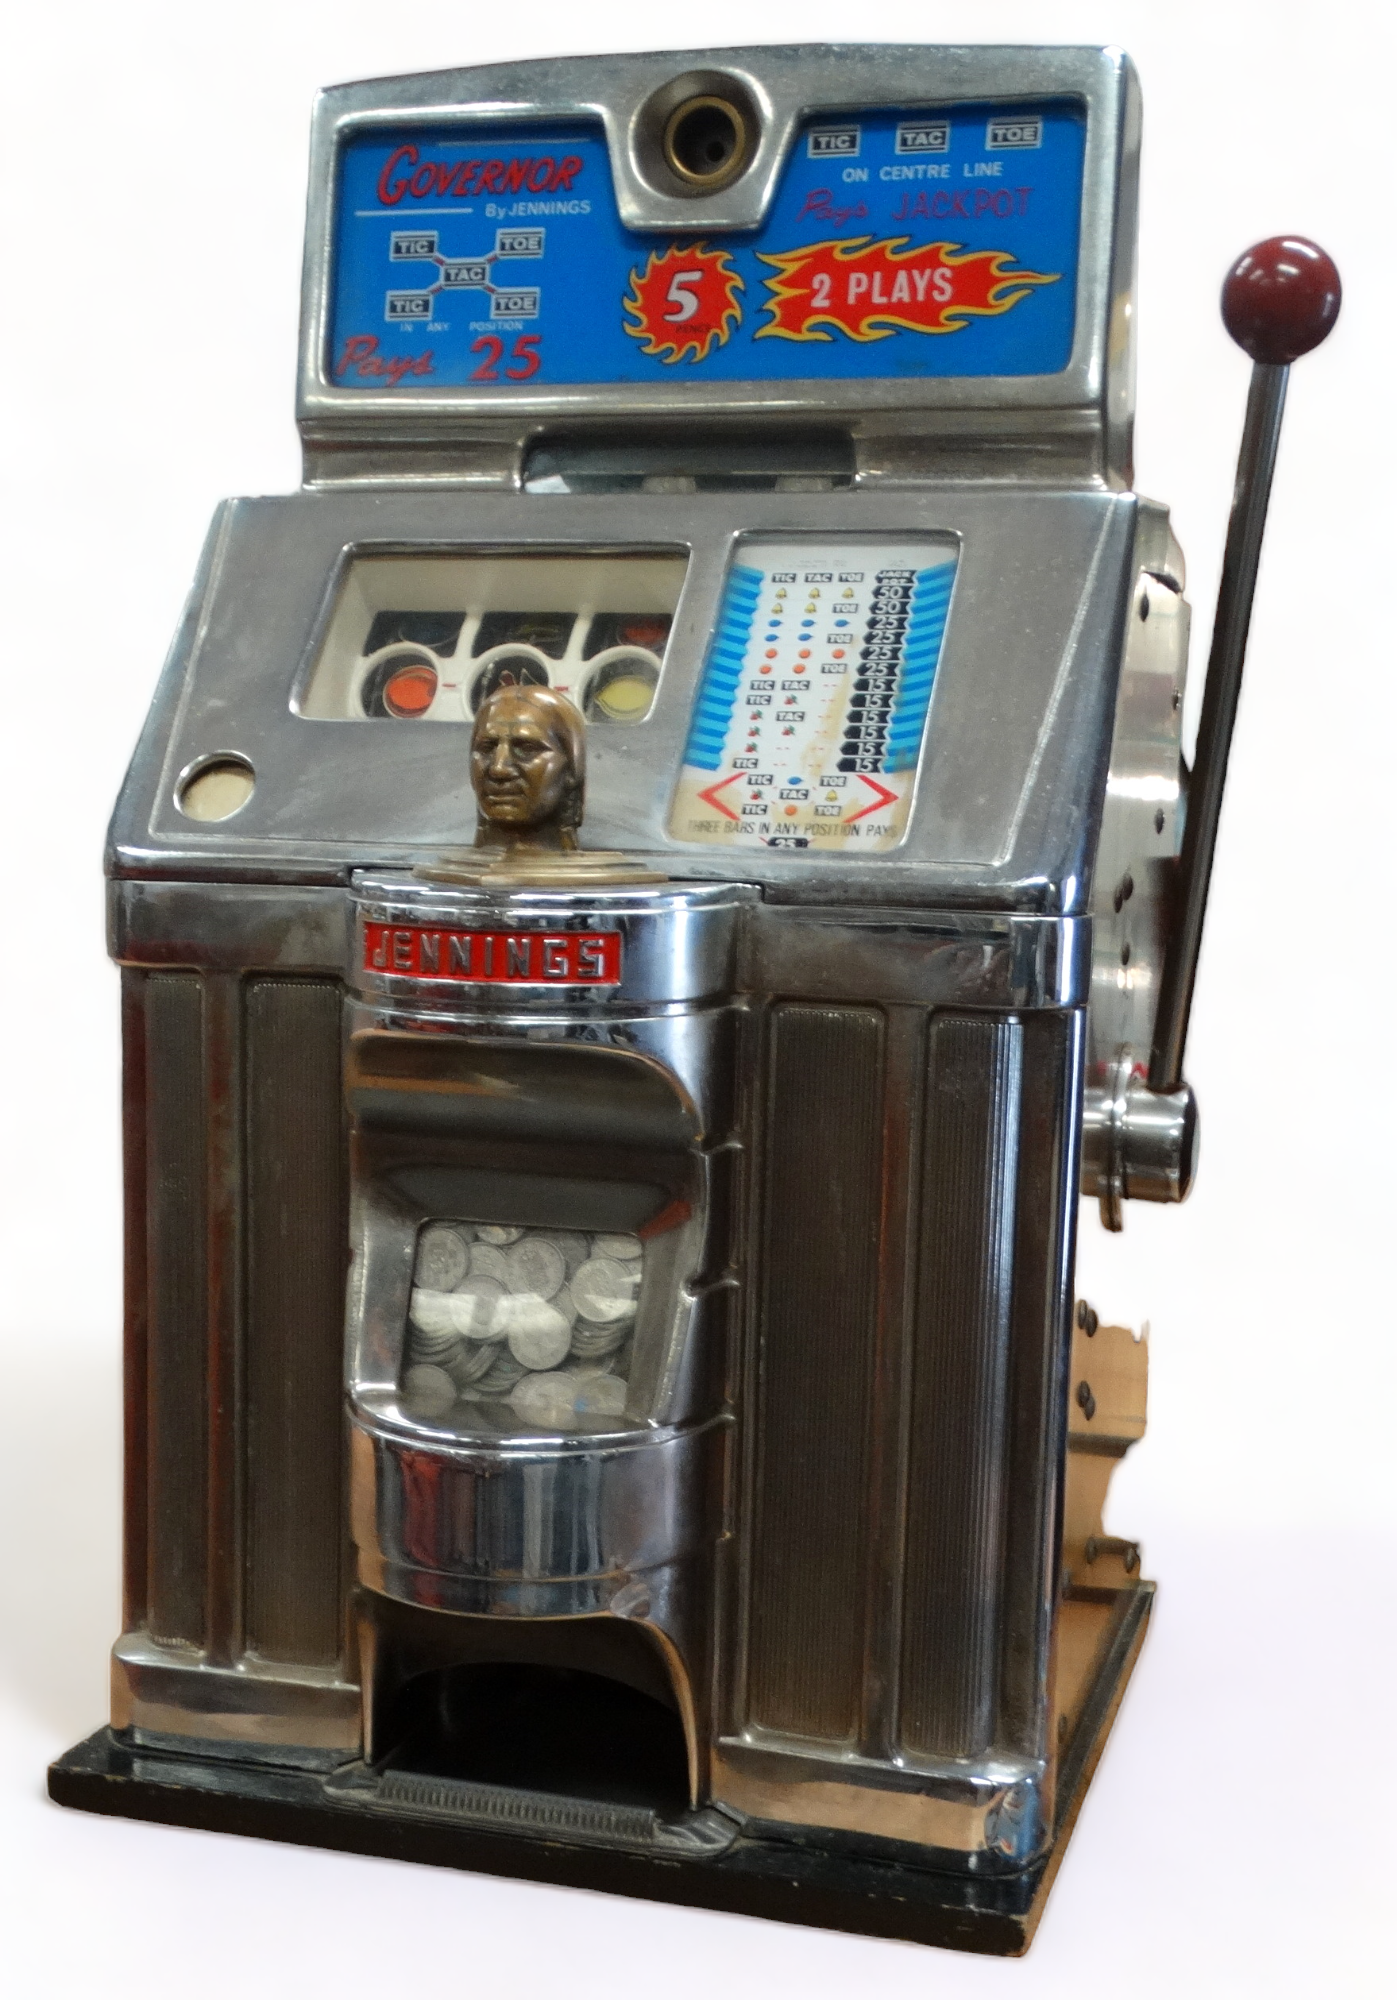 A Jennings-Governor mid 20th century American one arm bandit slot machine - chrome case with Tic-